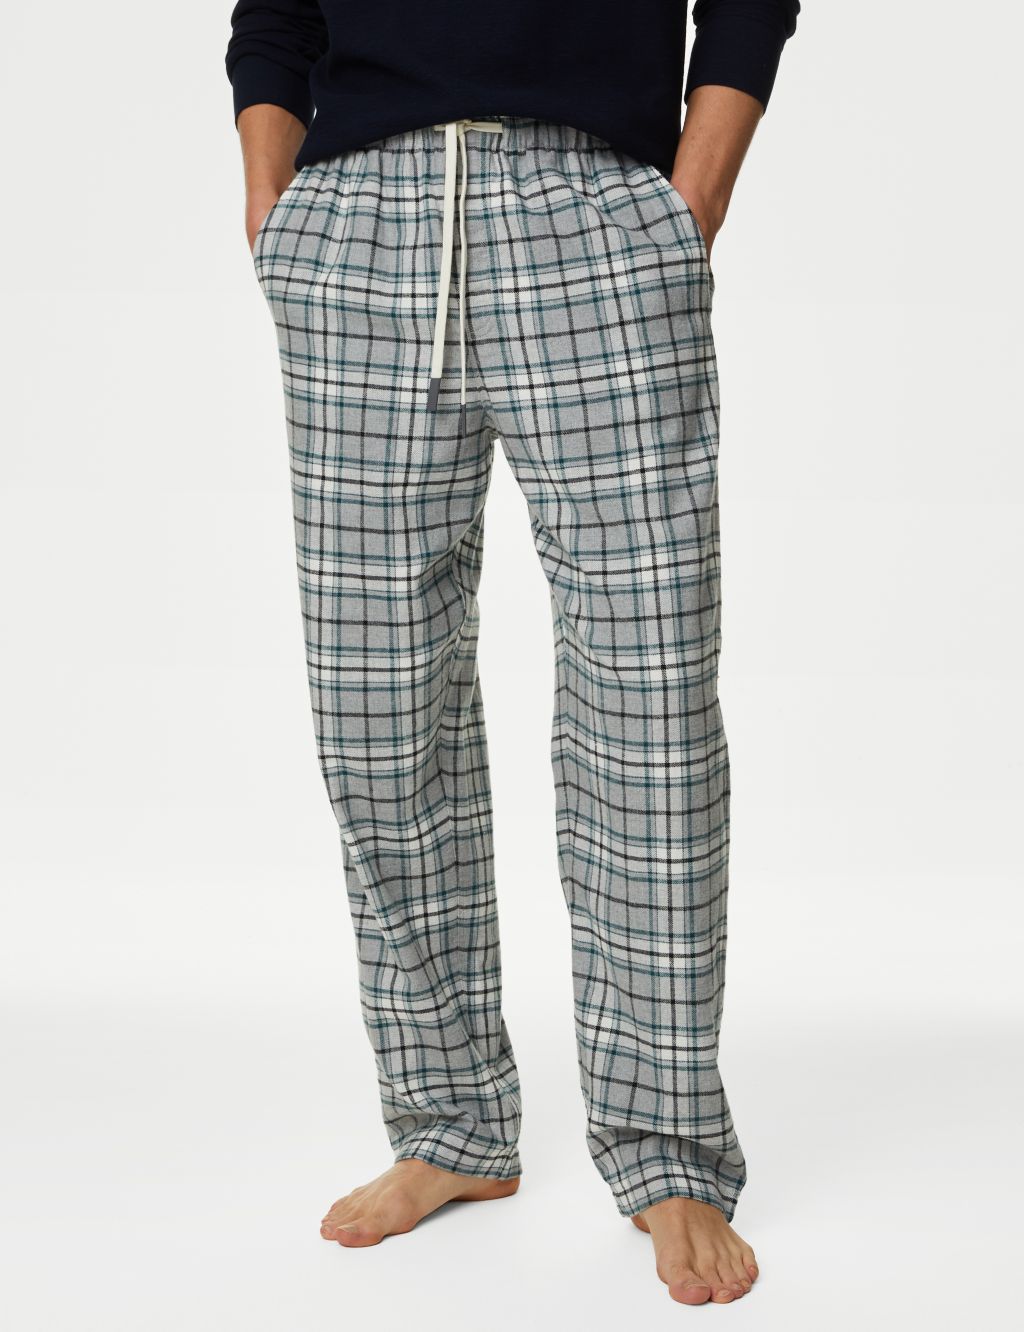 Brushed Cotton Checked Loungewear Bottoms image 3